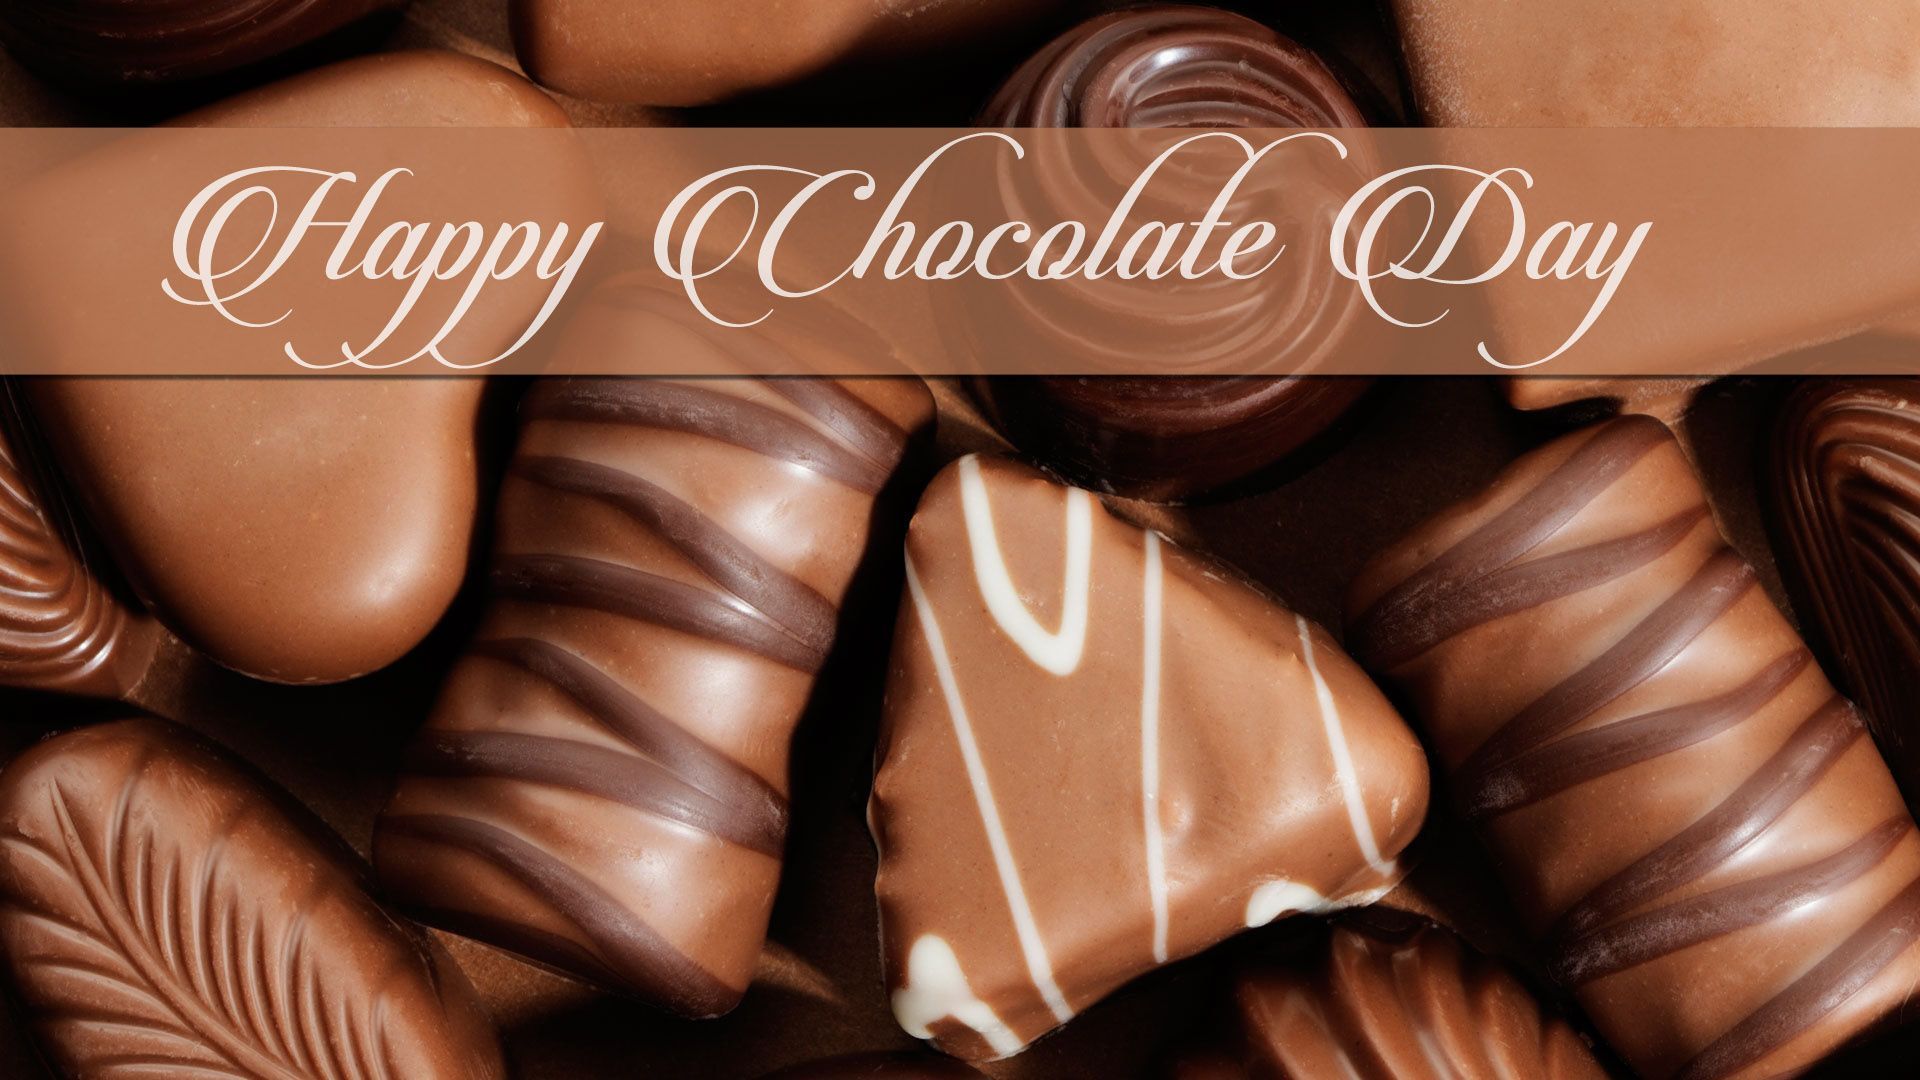 Happy chocolate day .in.com